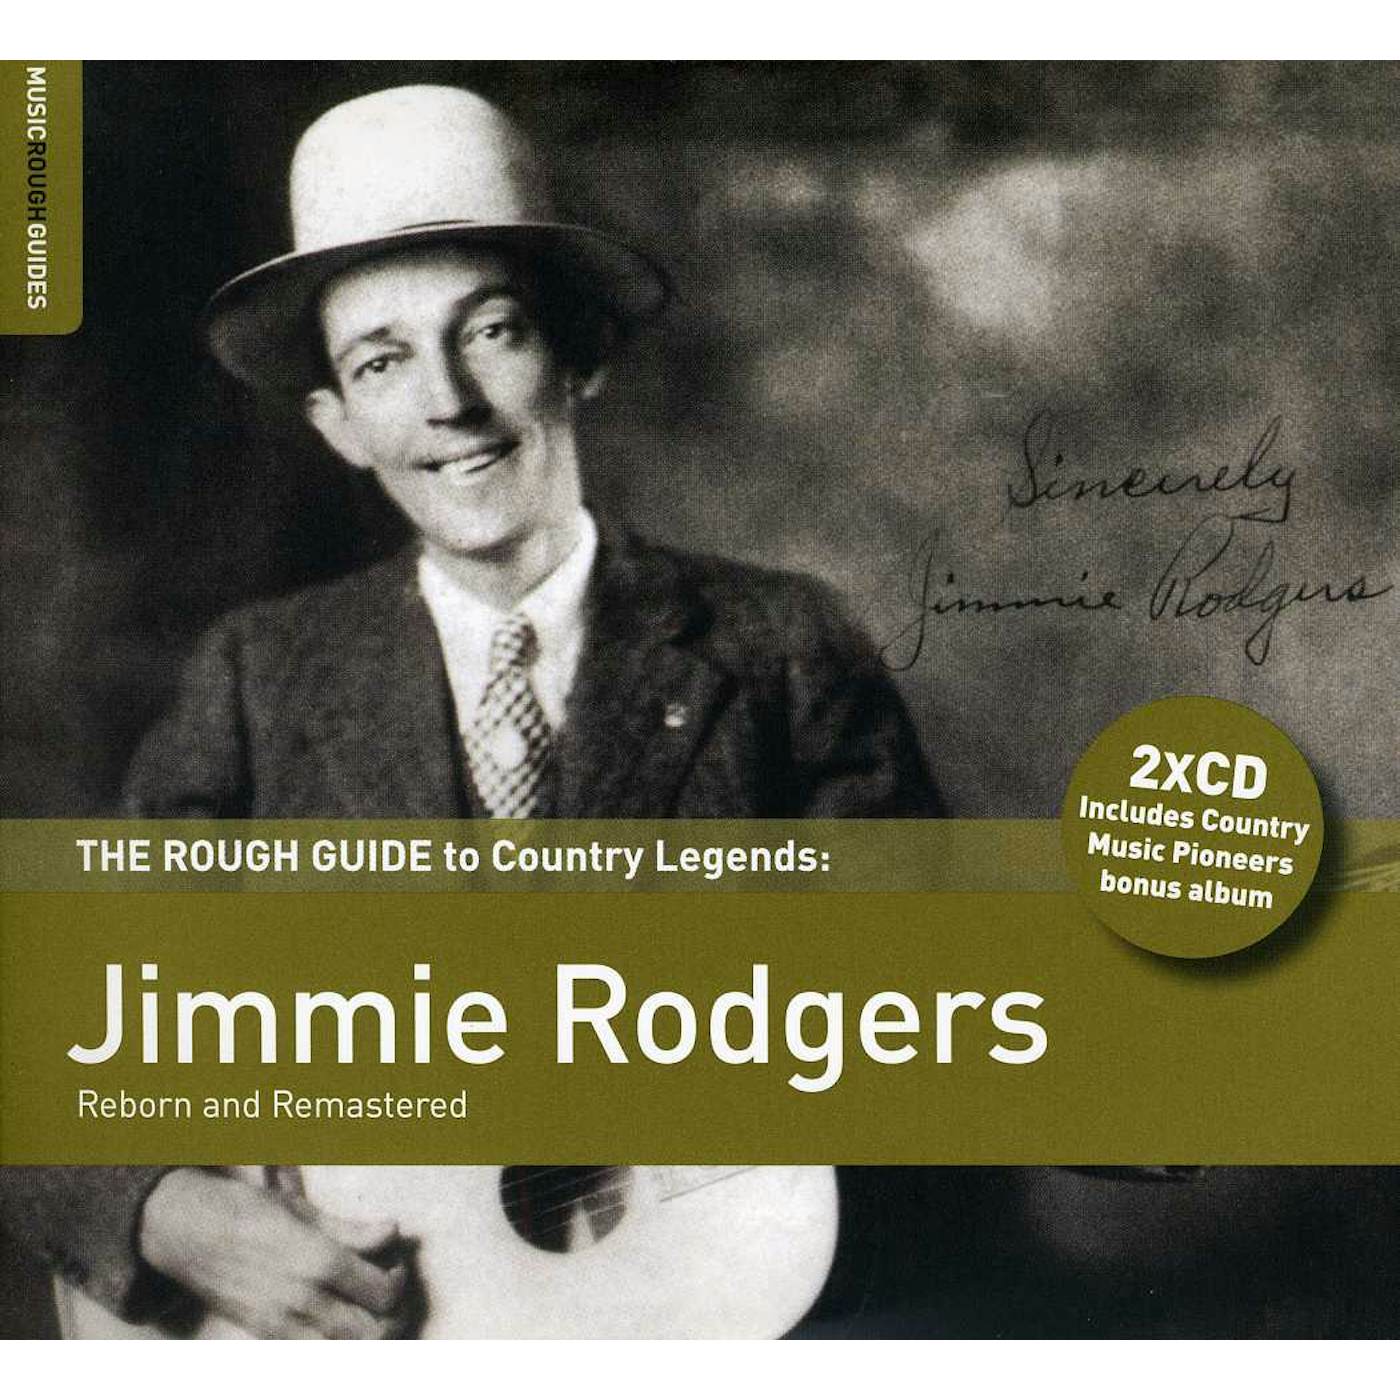 ROUGH GUIDE TO JIMMIE RODGERS CD